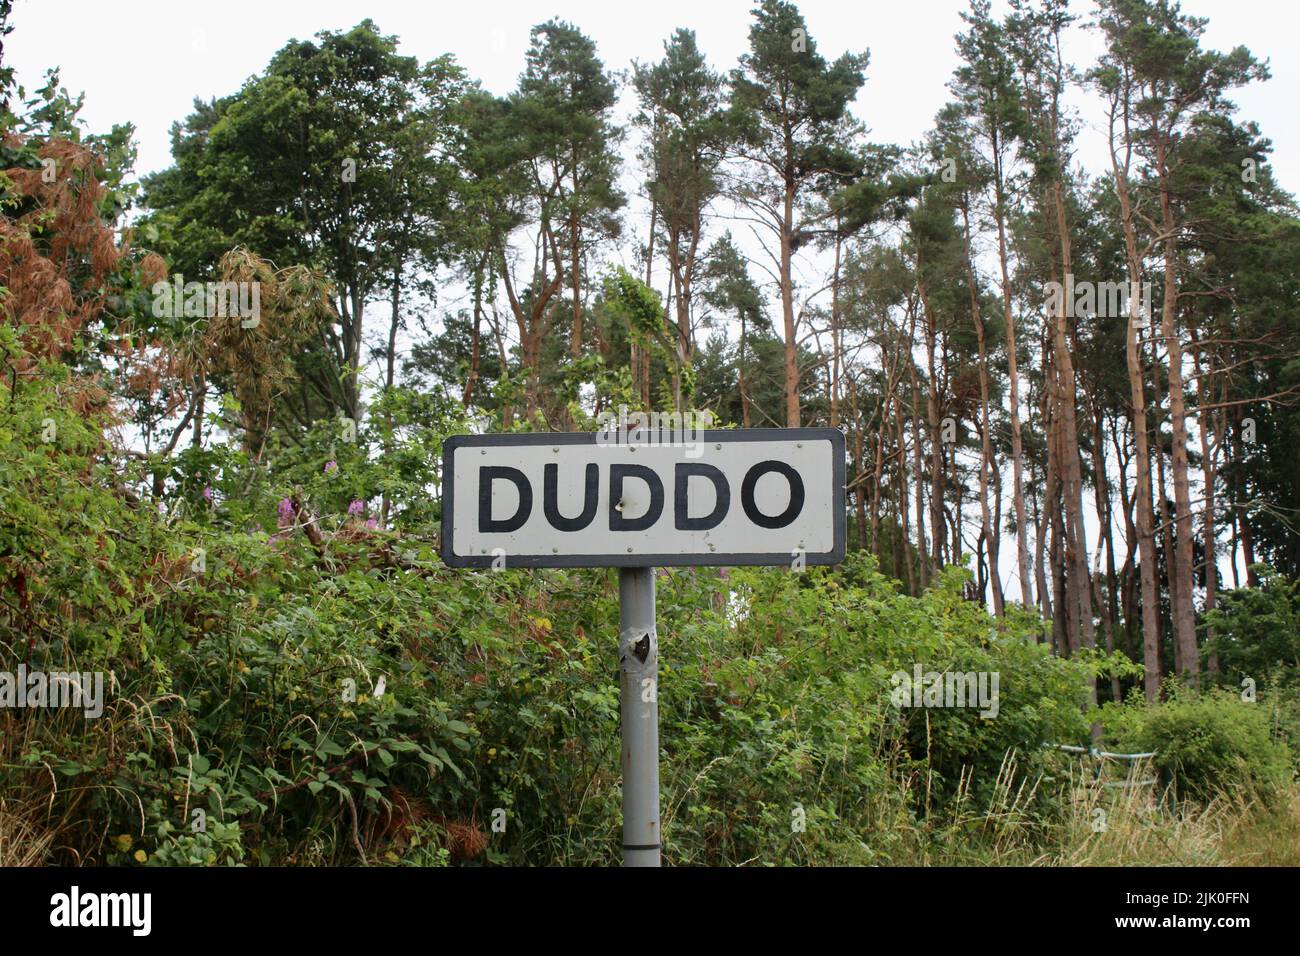 road sign for village called duddo in northumberland england uk Stock Photo